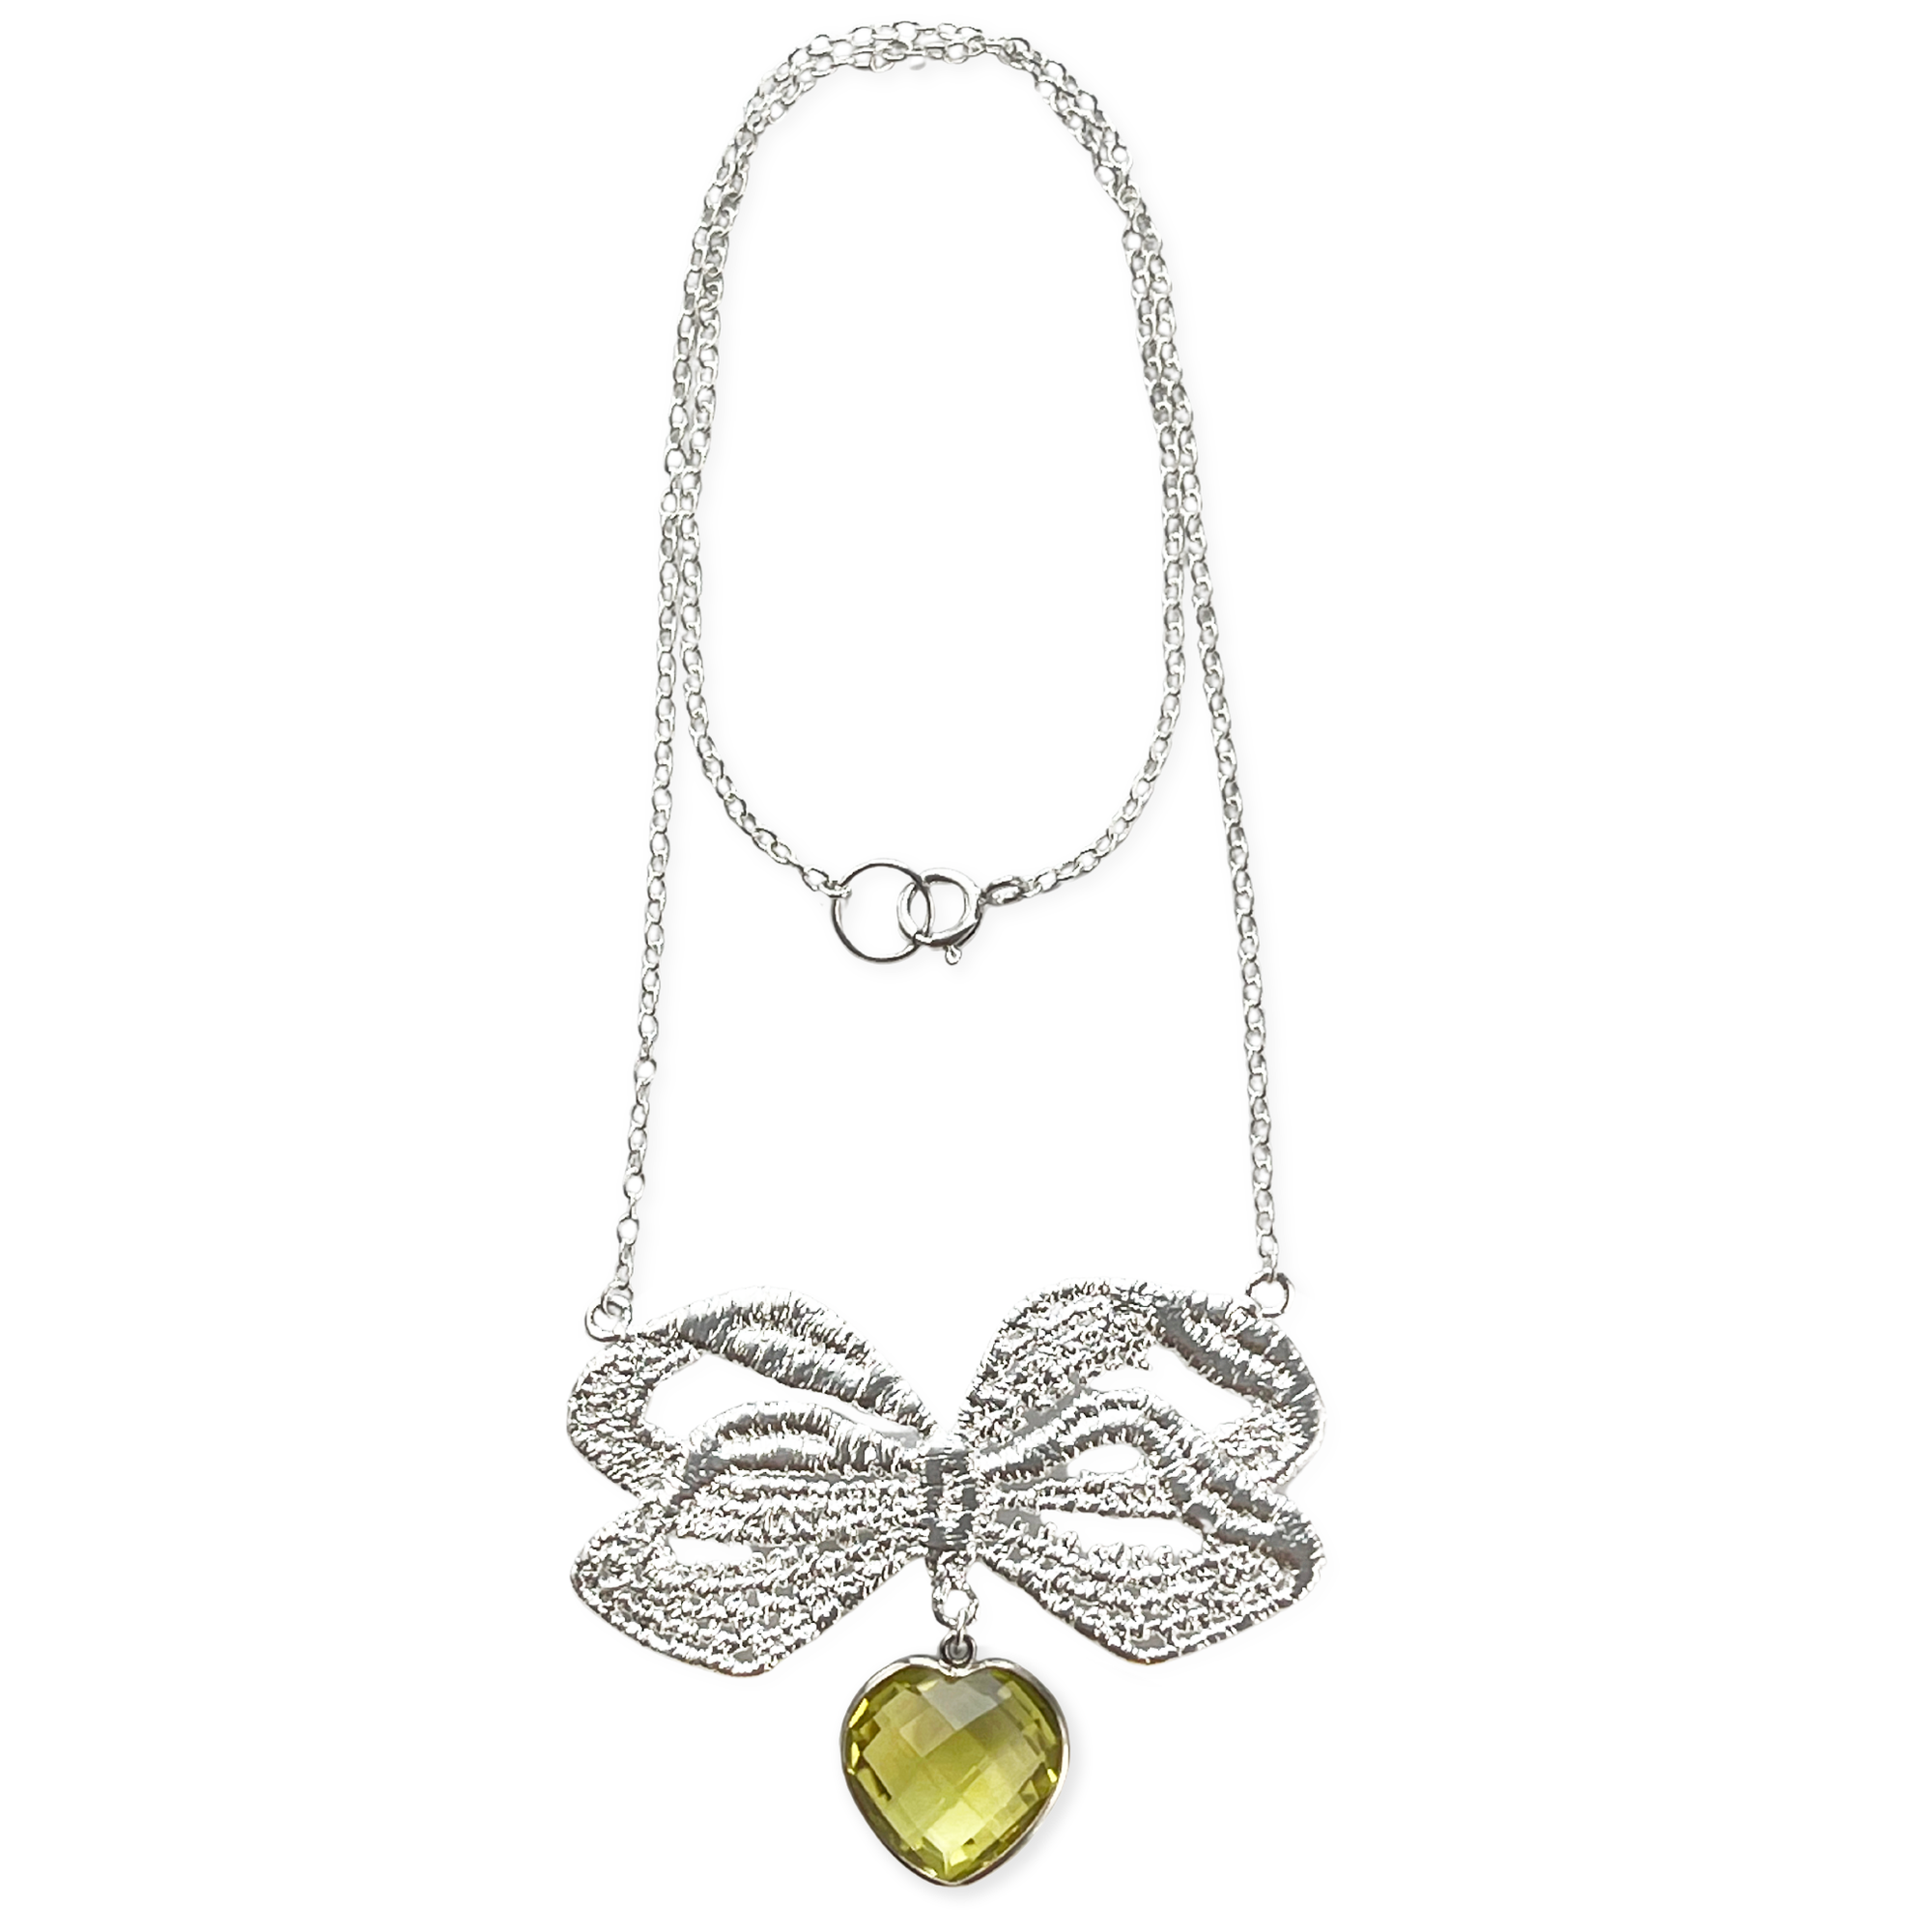 Necklace with lace bow in silver and heart Citrine stone.